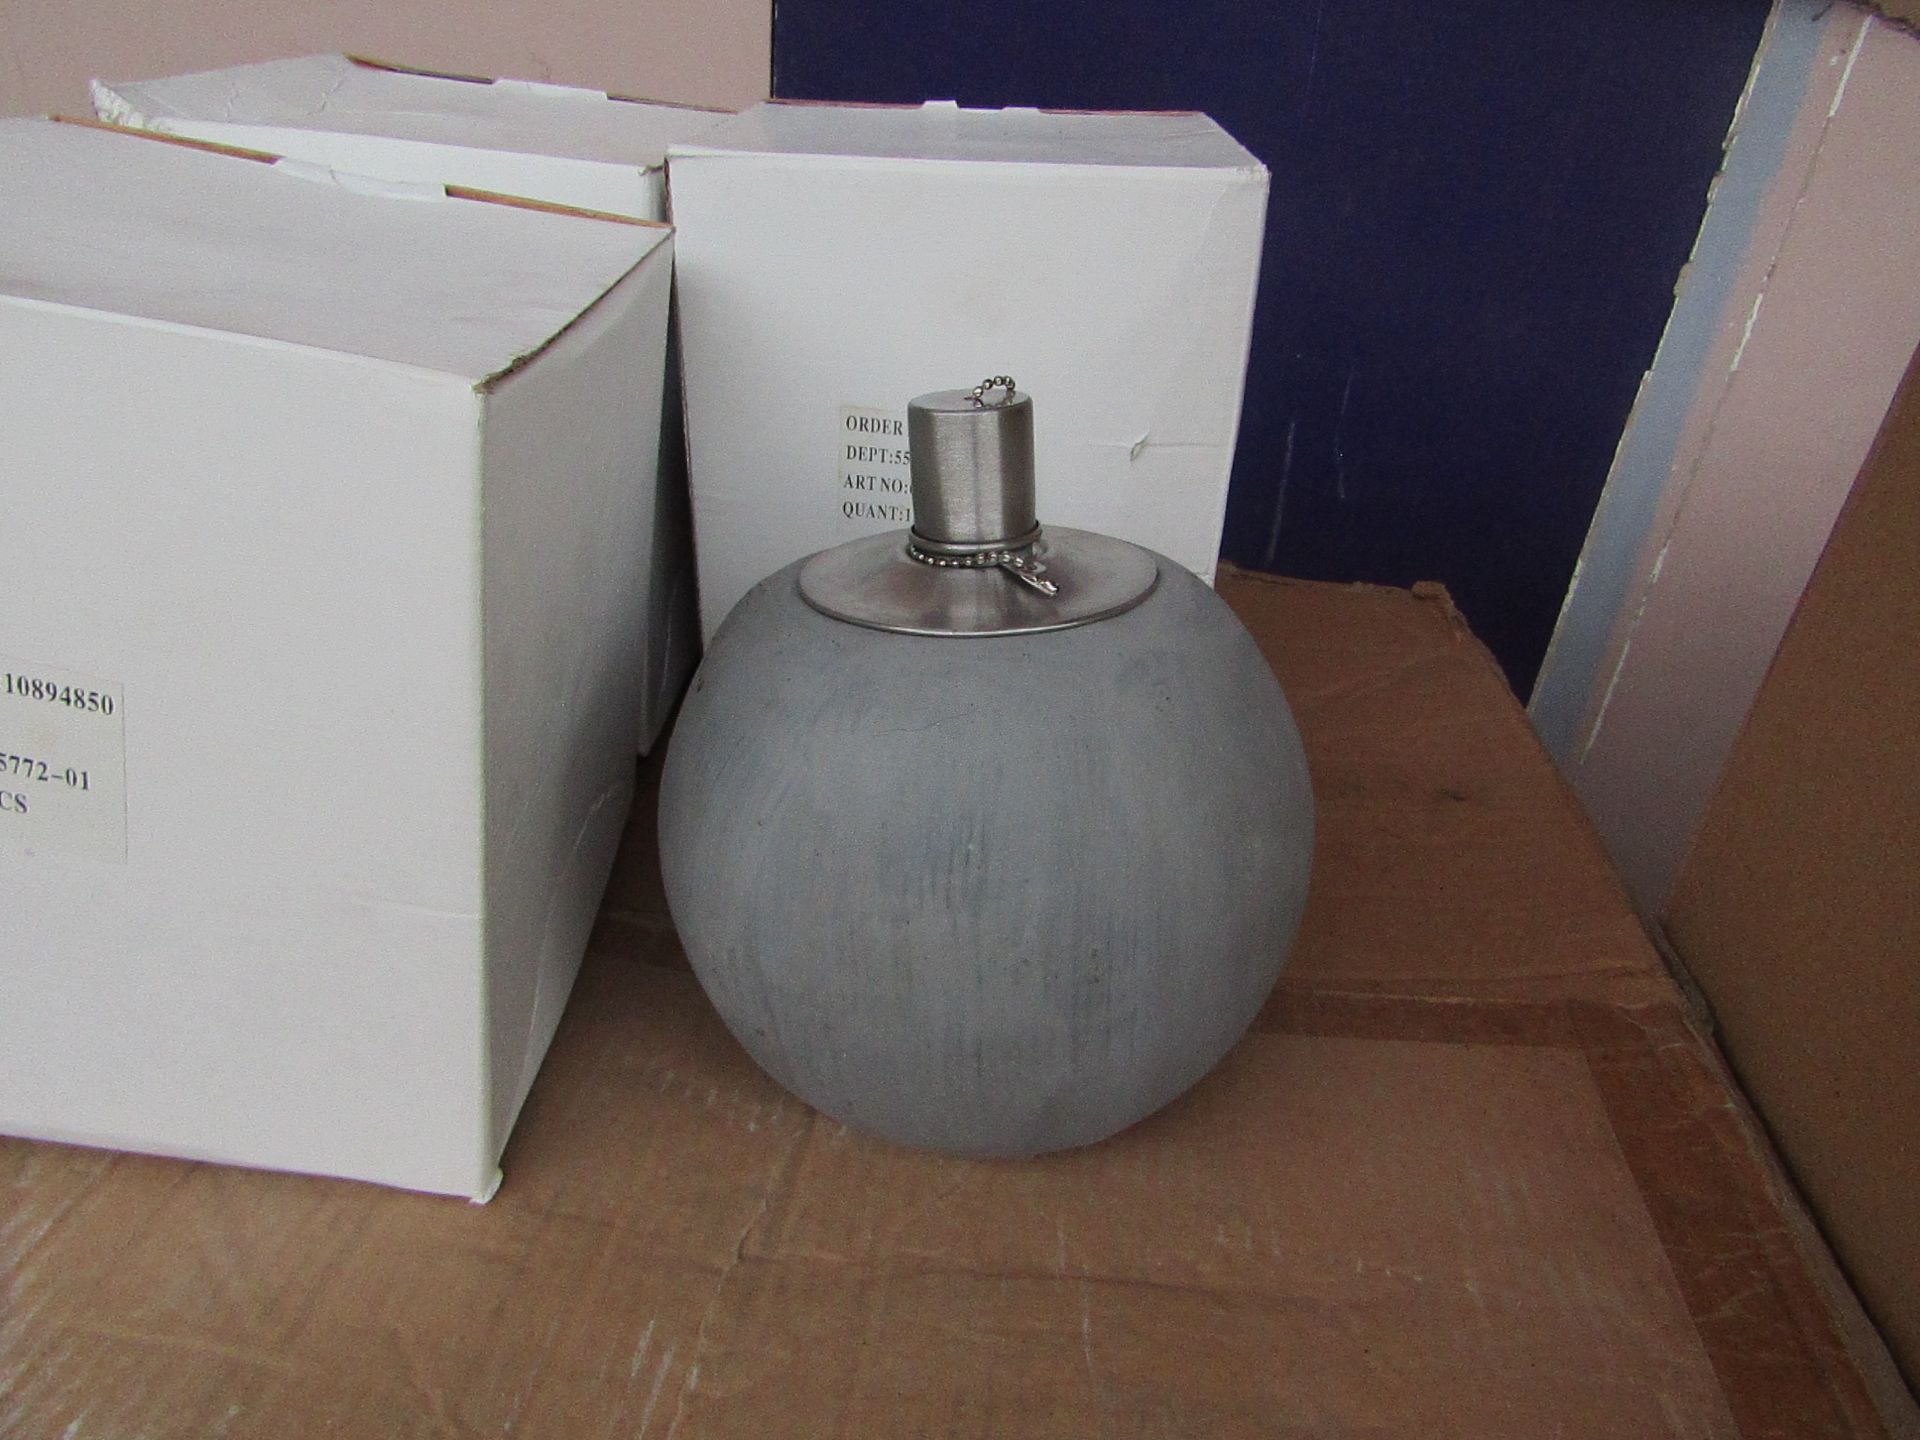 5x Grey Concrete Citronella Oil Garden Table Lamp Light - Unchecked & Boxed - RRP £24.99 For Each